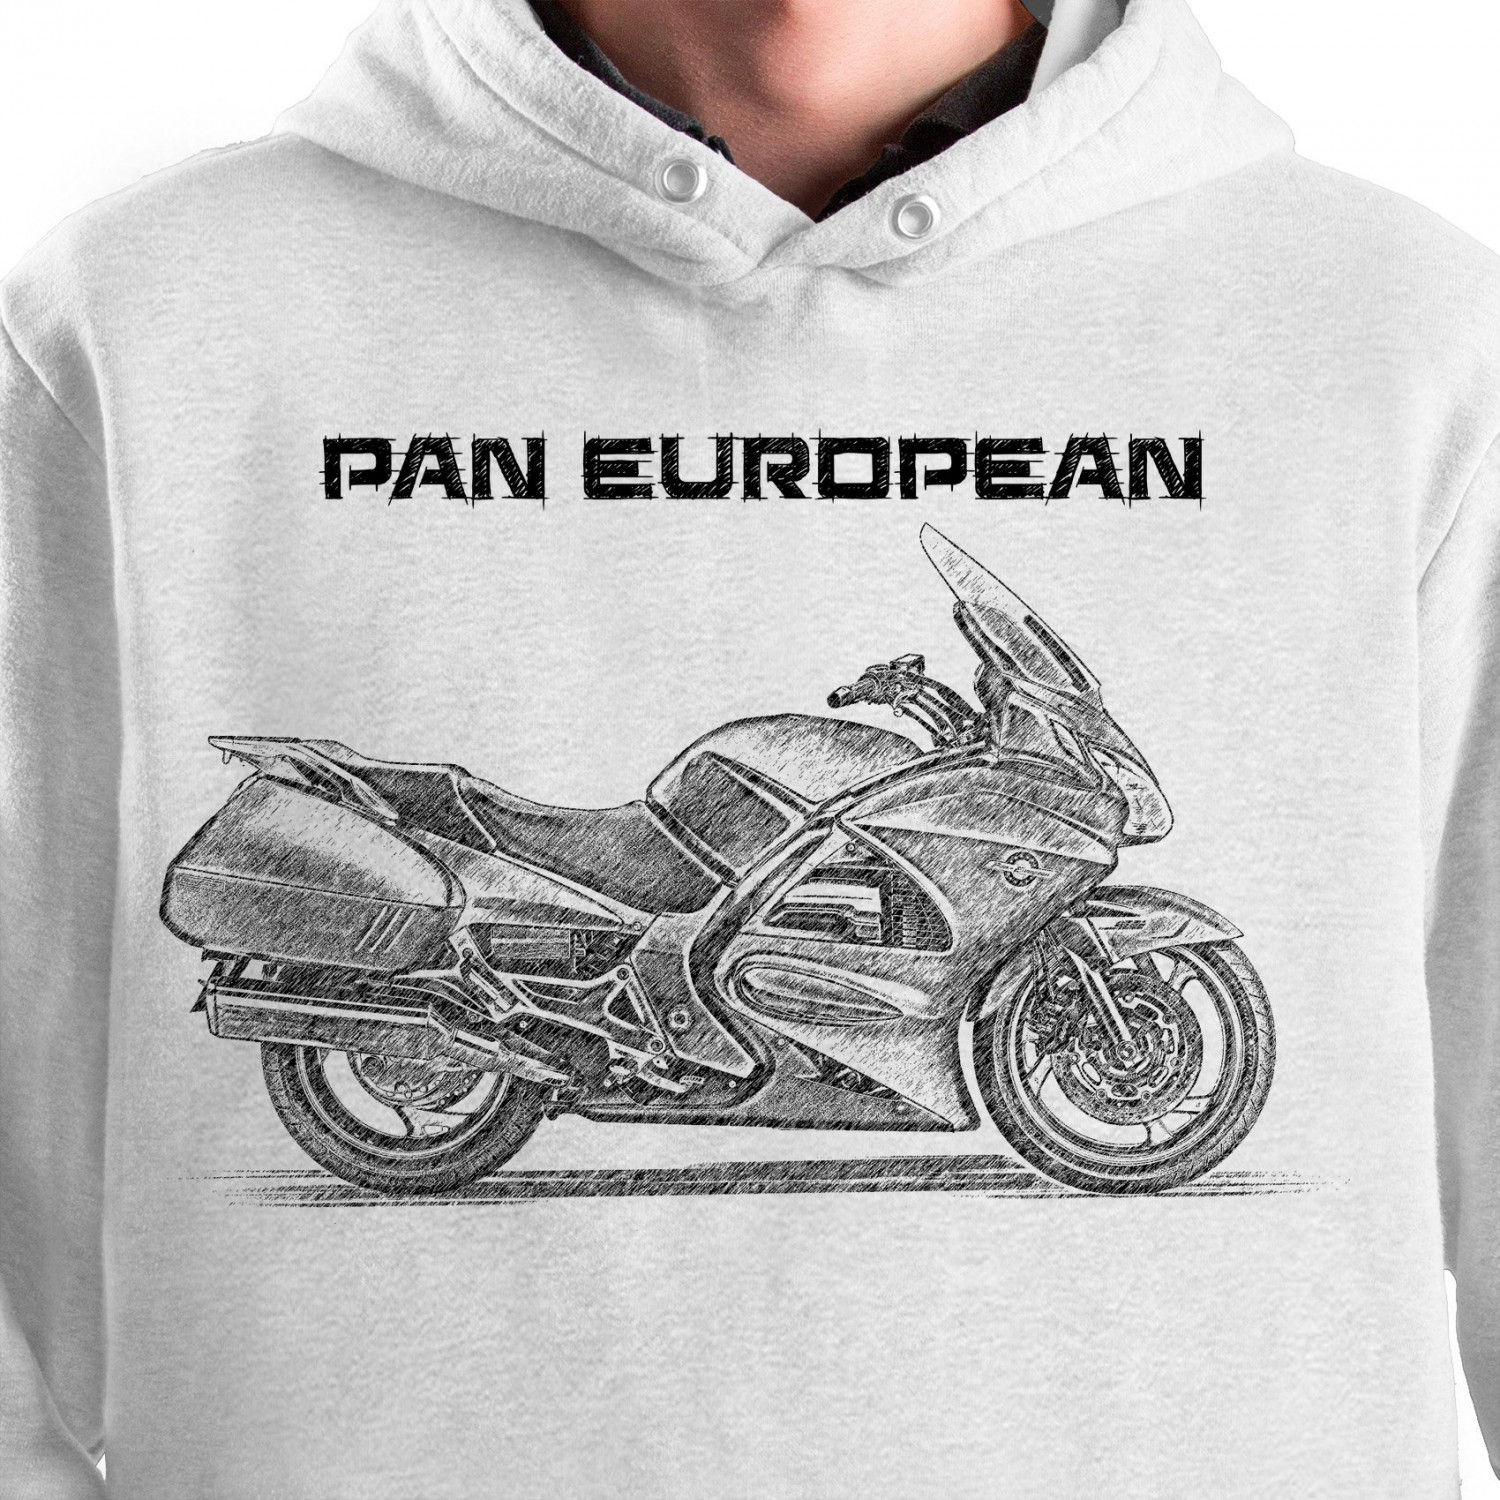 White T-shirt with HONDA ST 1300 Pan European. Gift for motorcyclist.